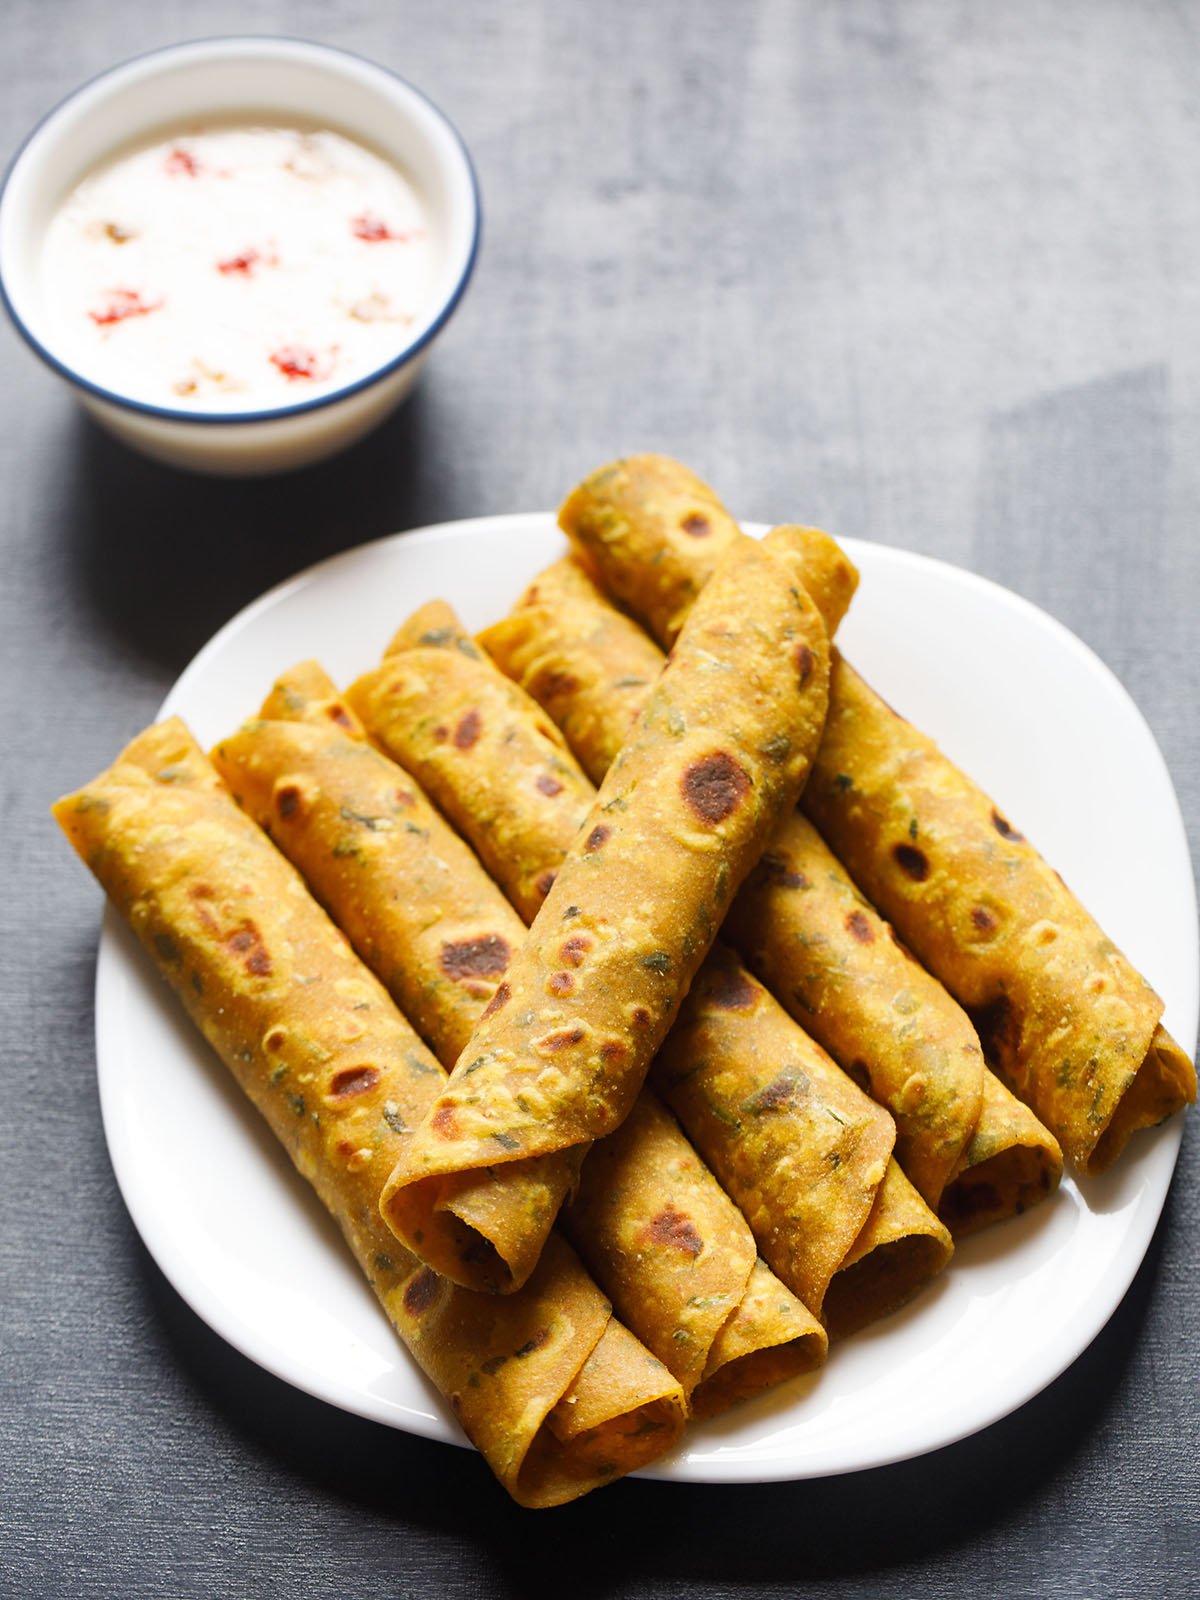 a thepla roll placed in a slant direction over five stacked methi thepla rolls on white plate on blue black board with a side of raita on top left